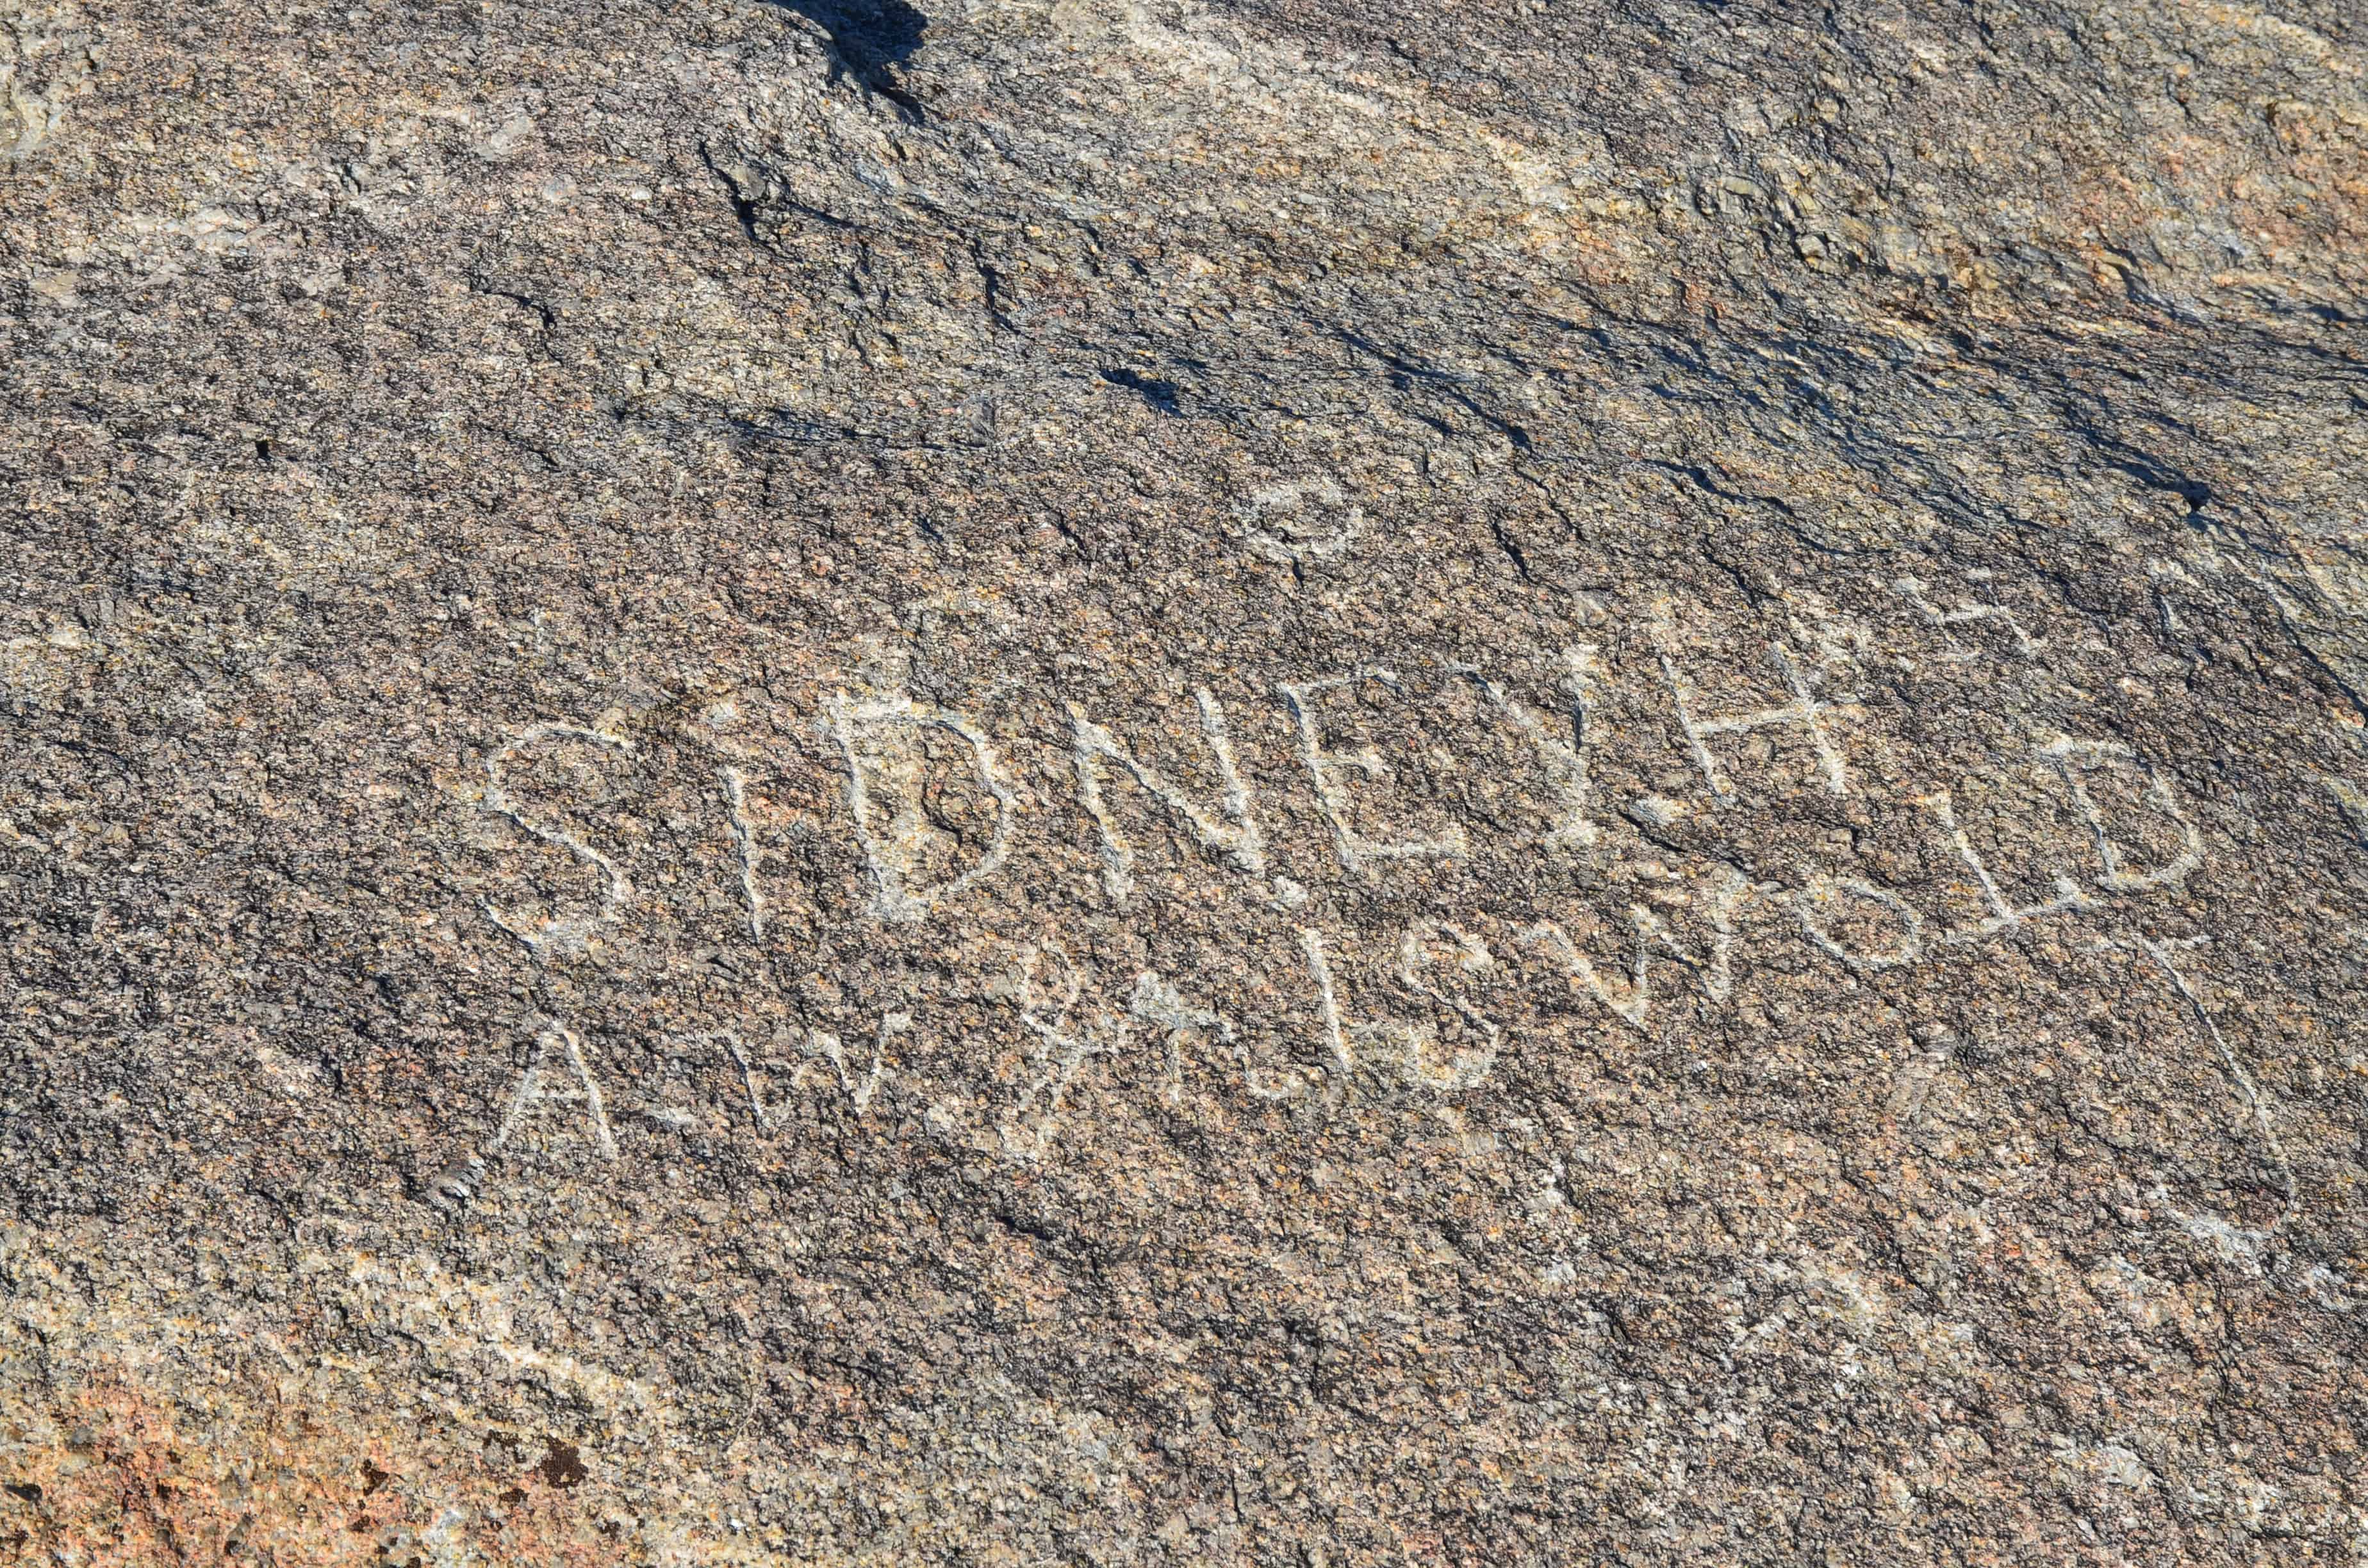 Names carved into the rock at Independence Rock State Historic Site in Wyoming